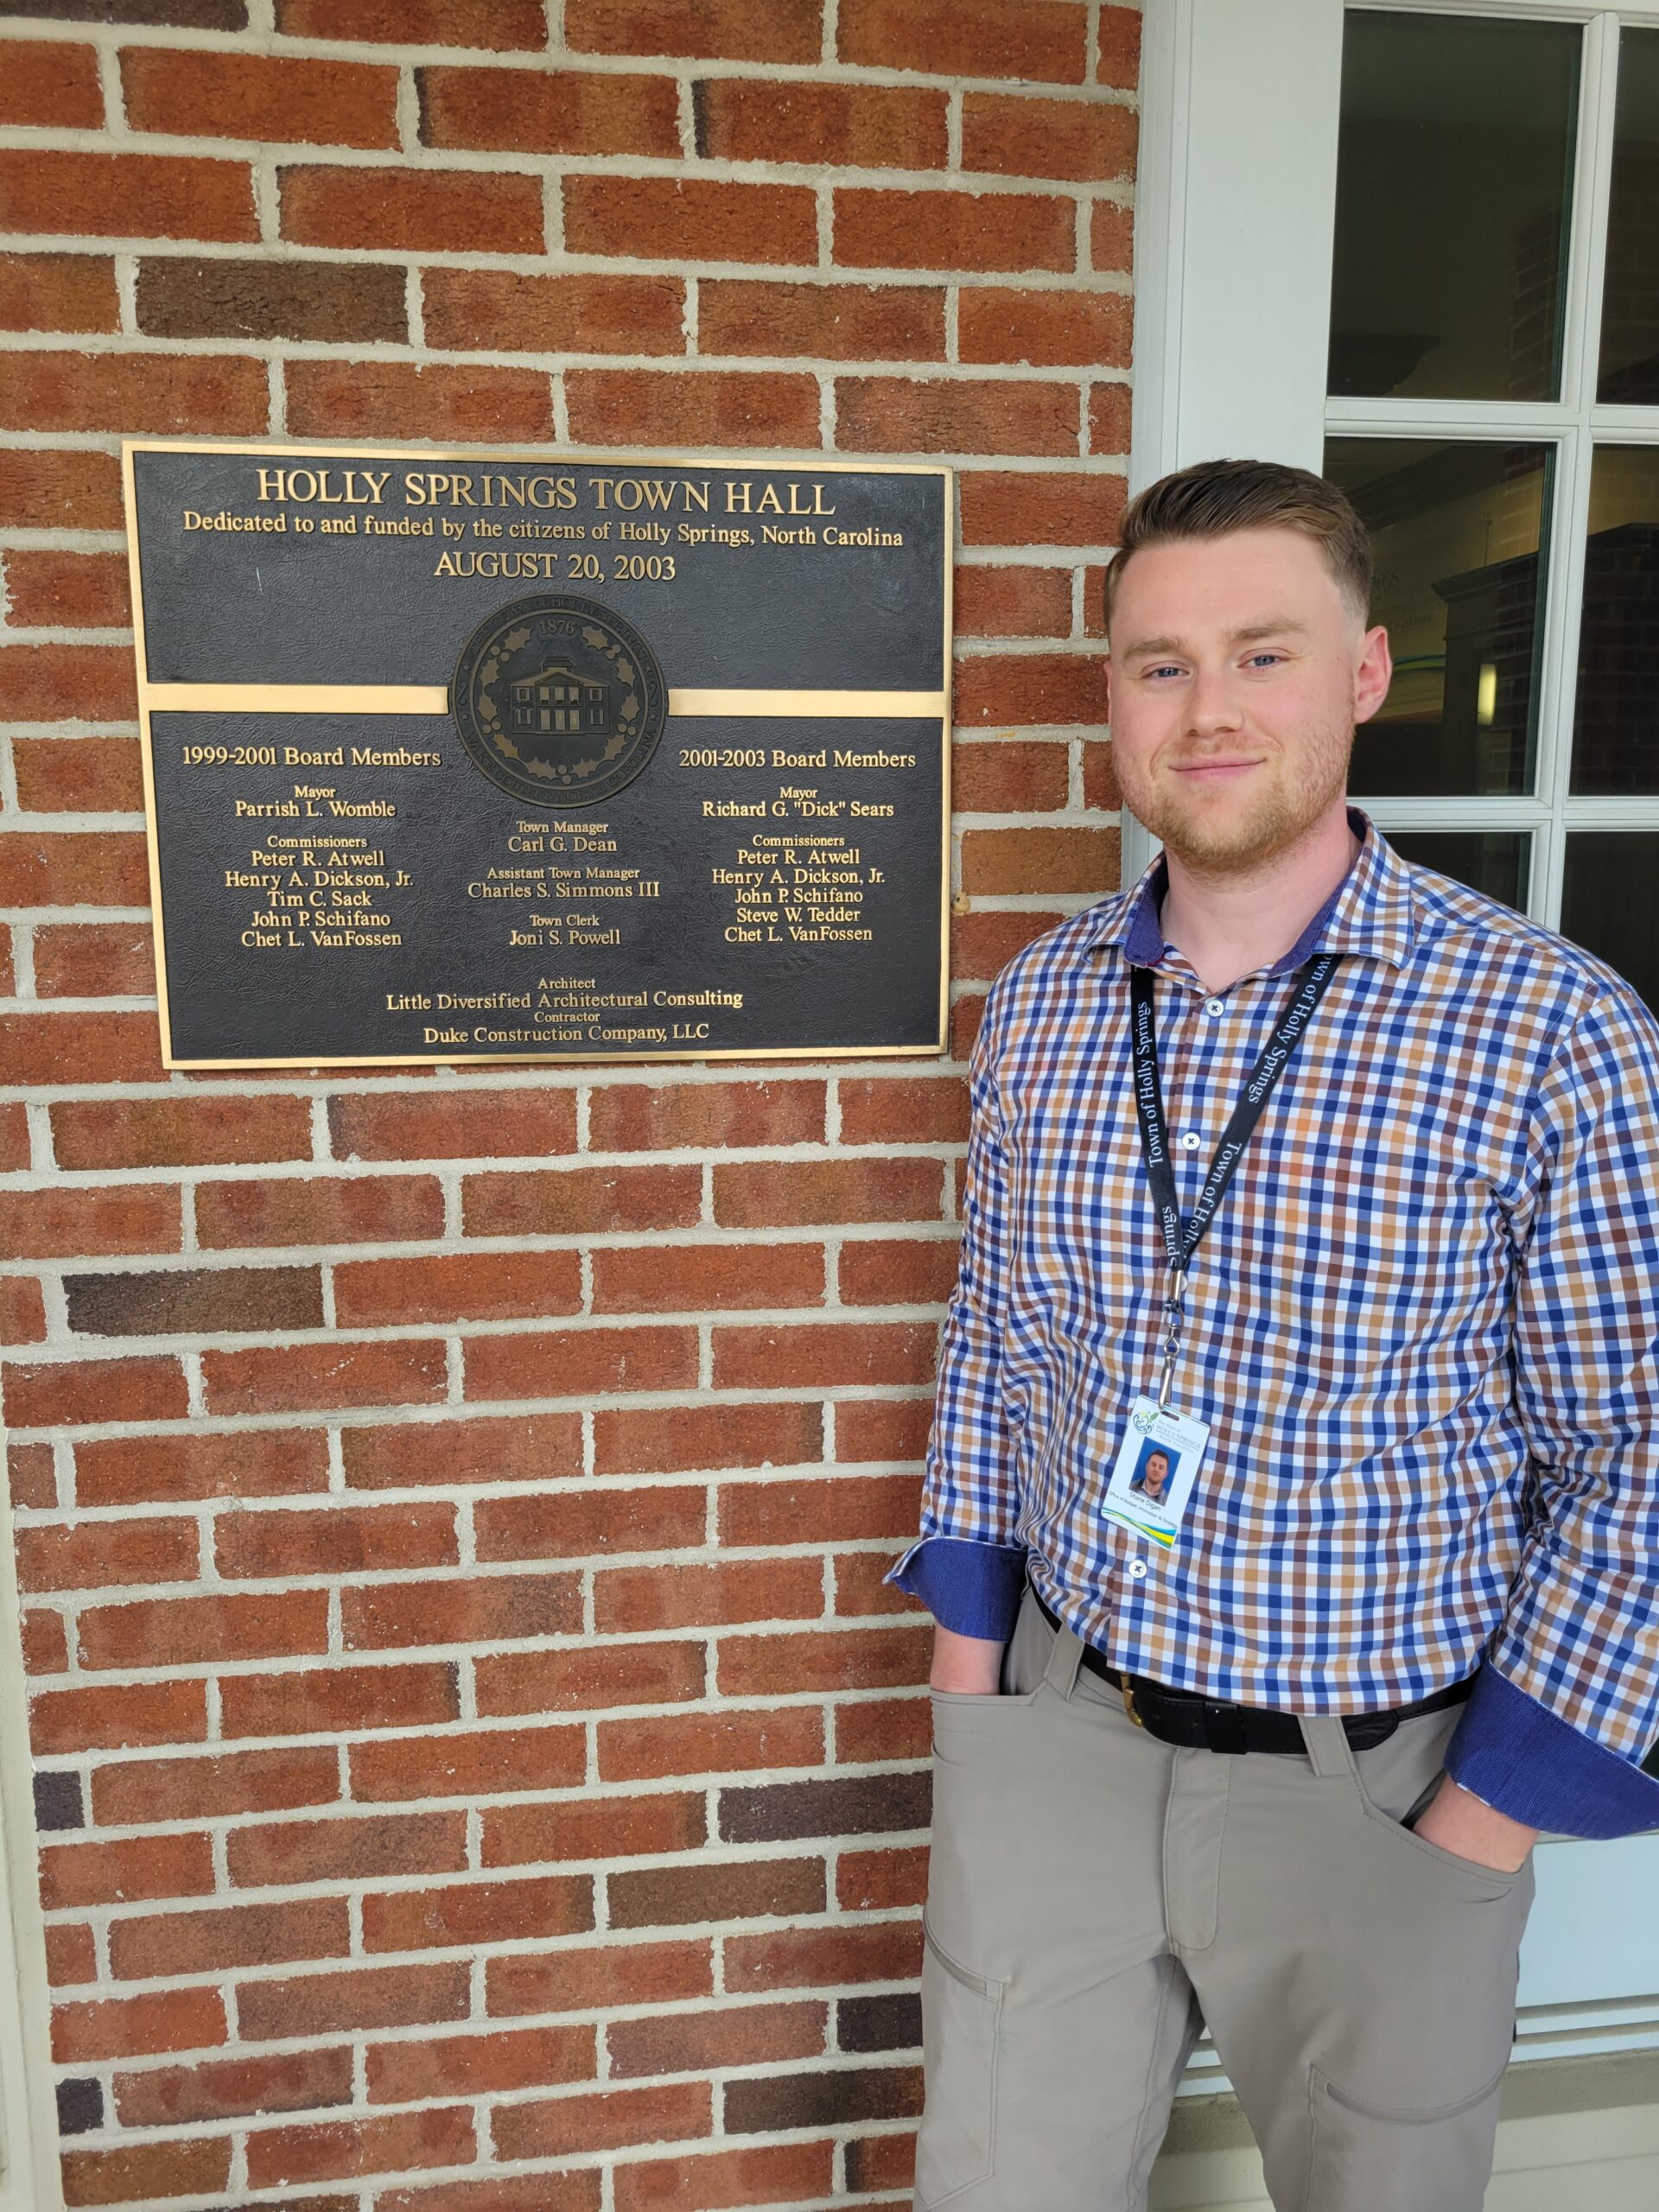 UNC MPA student Shane Digan shifts career interest from city planning to local government management in new opportunity with the Town of Holly Springs Featured Image